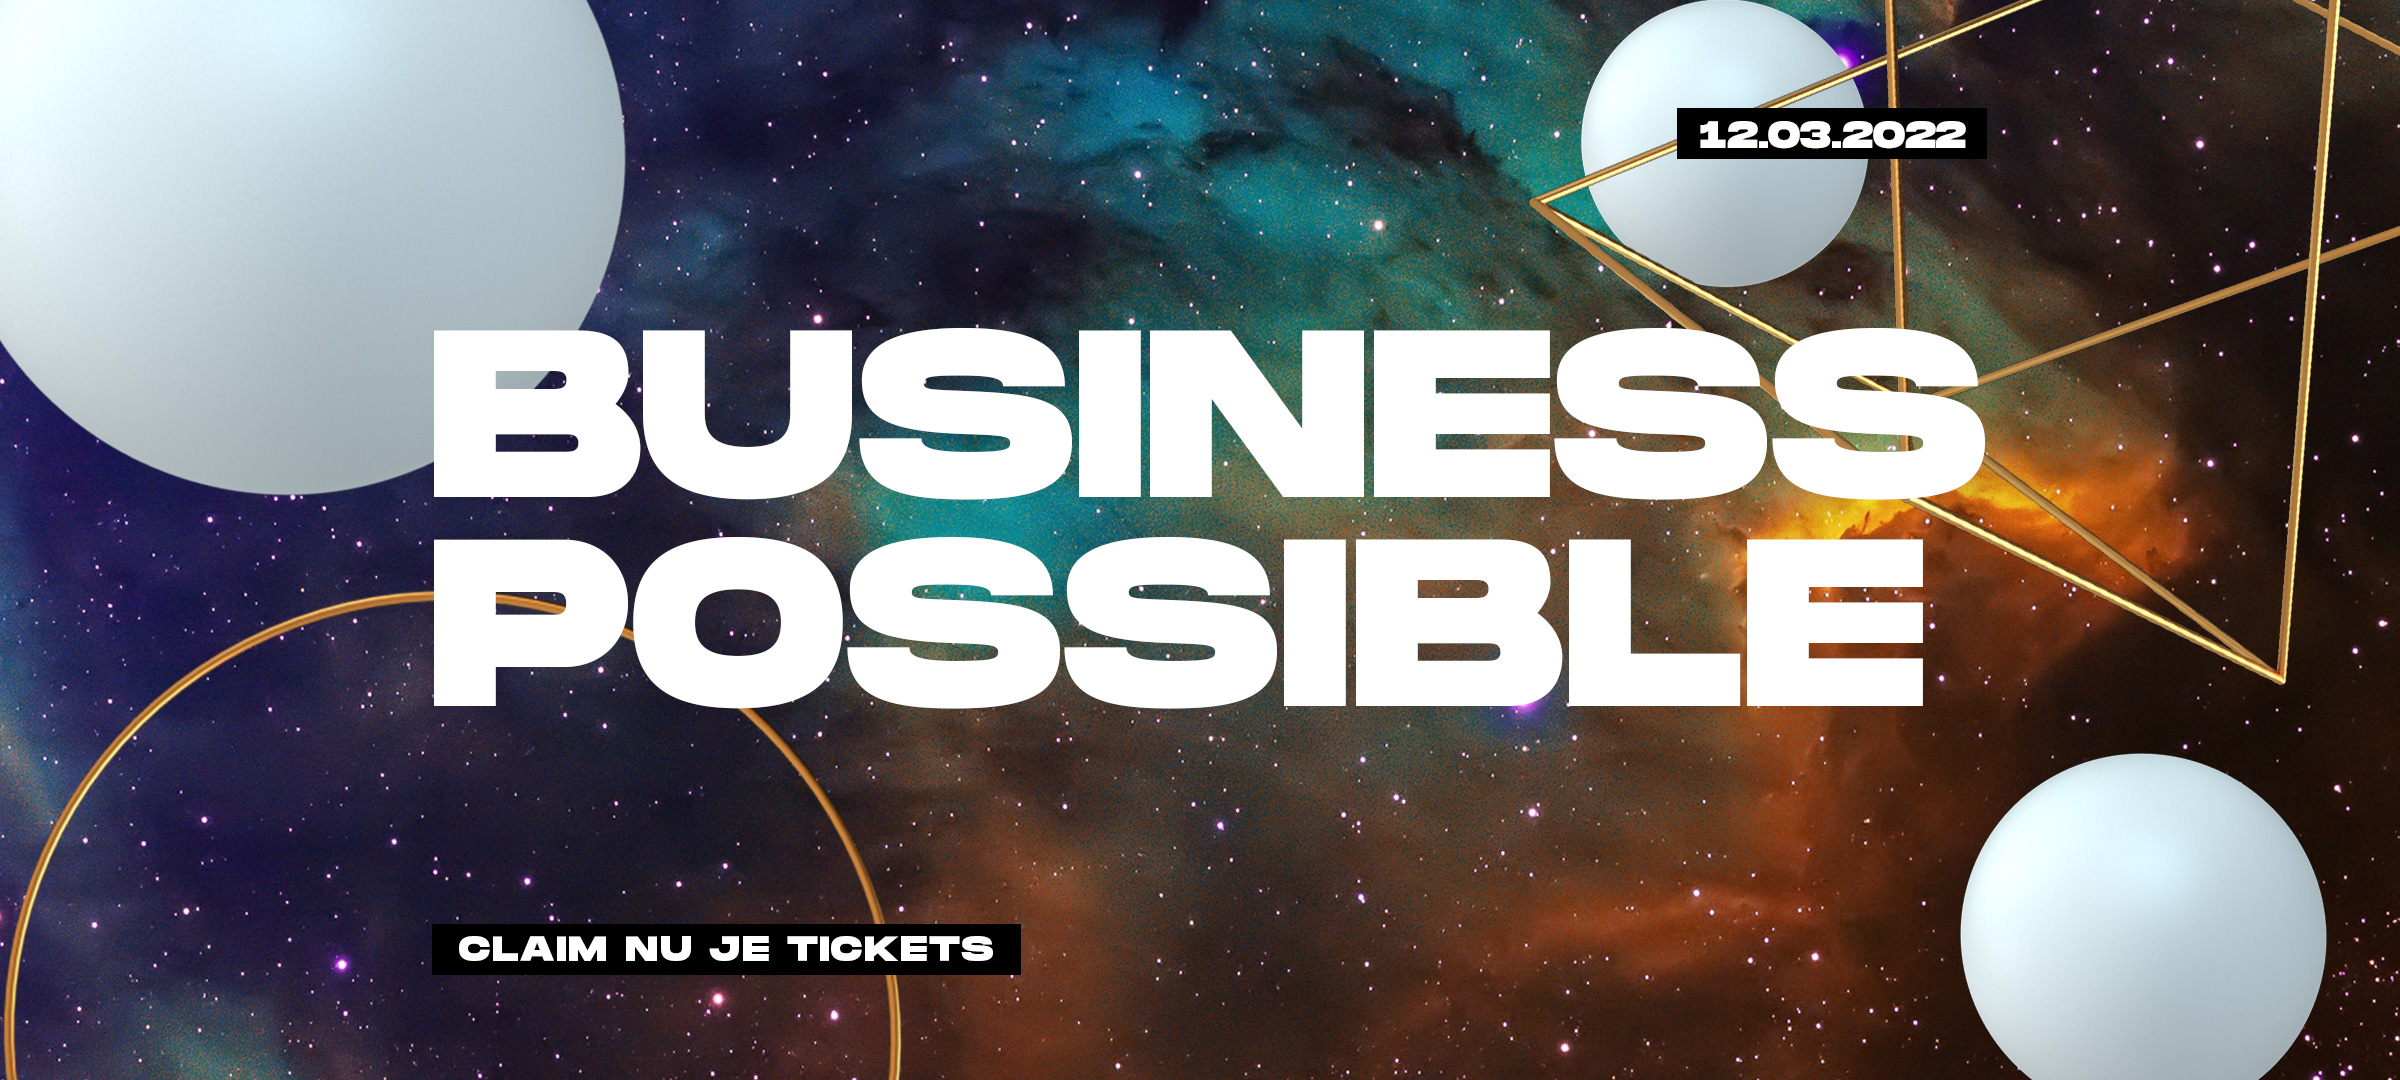 tickets-business-possible-2022